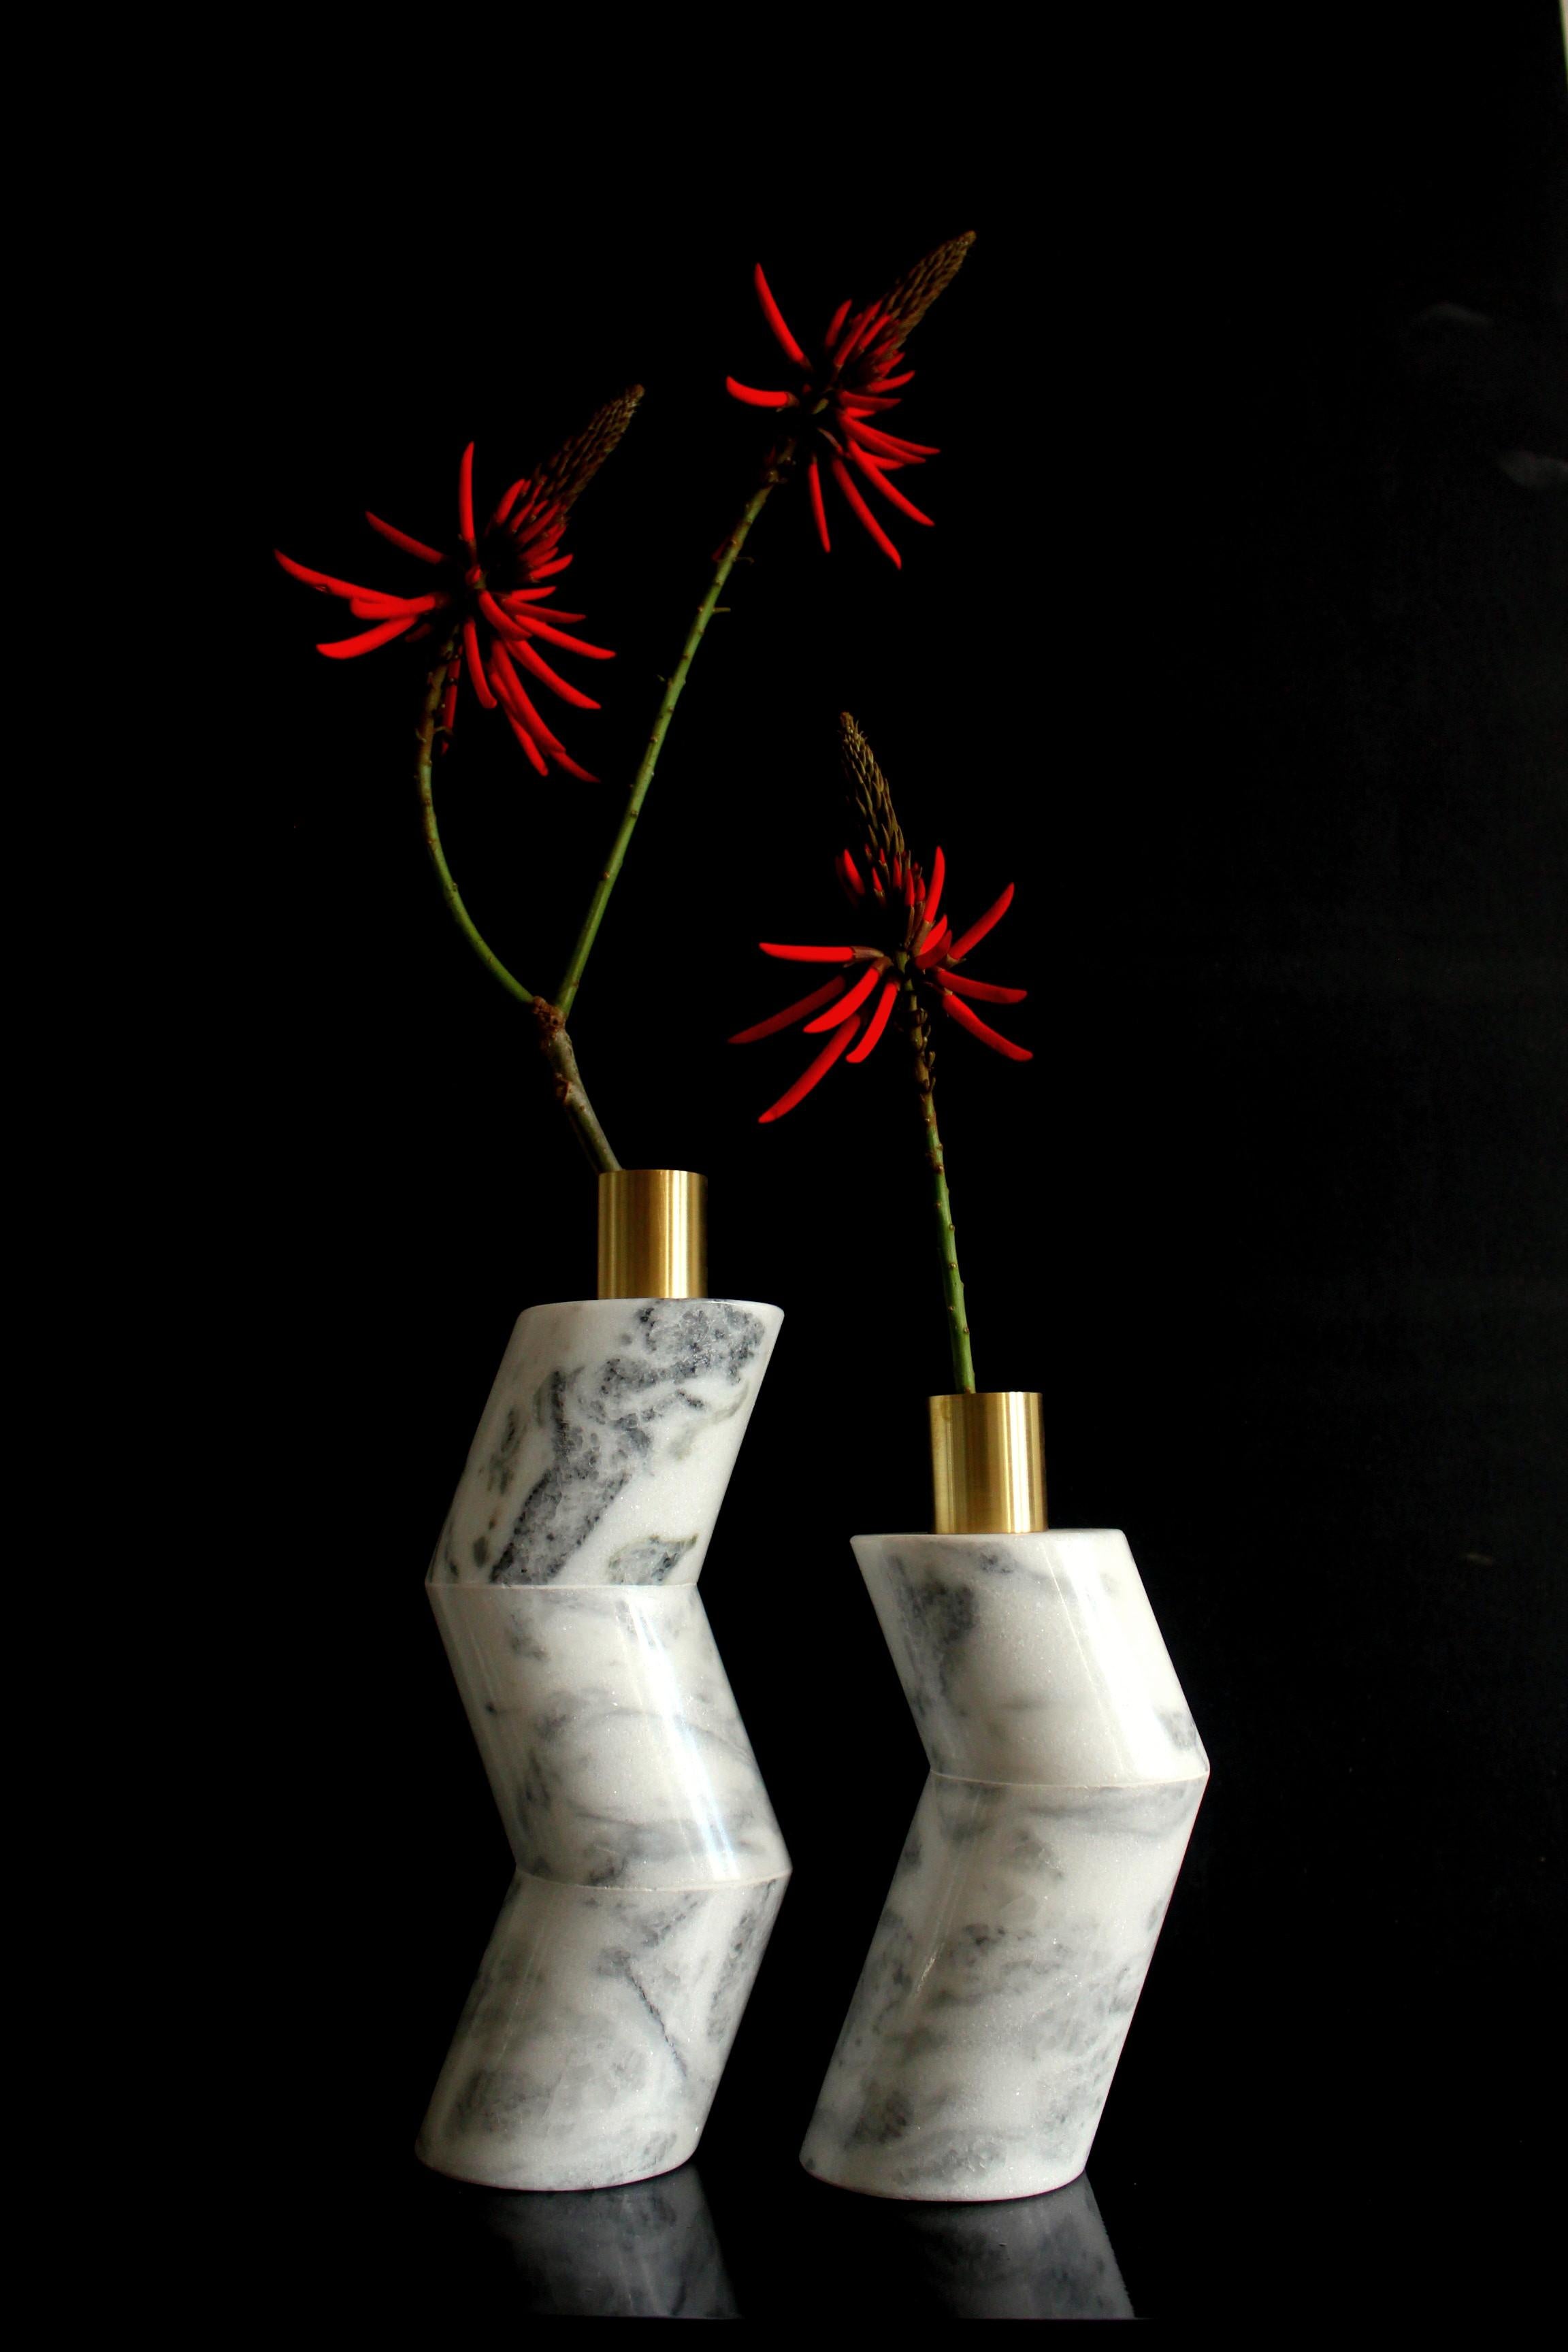 Pair of Ginga vases by Gustavo Dias
Zara chair
wood: Different woods are available
designer: Gustavo Dias
Dimensions: 
Tall: 34 x 9 x 9 cm
Short: 27 x 9 x 9 cm
Available in wood and marble


Gustavo Dias
One one the most important